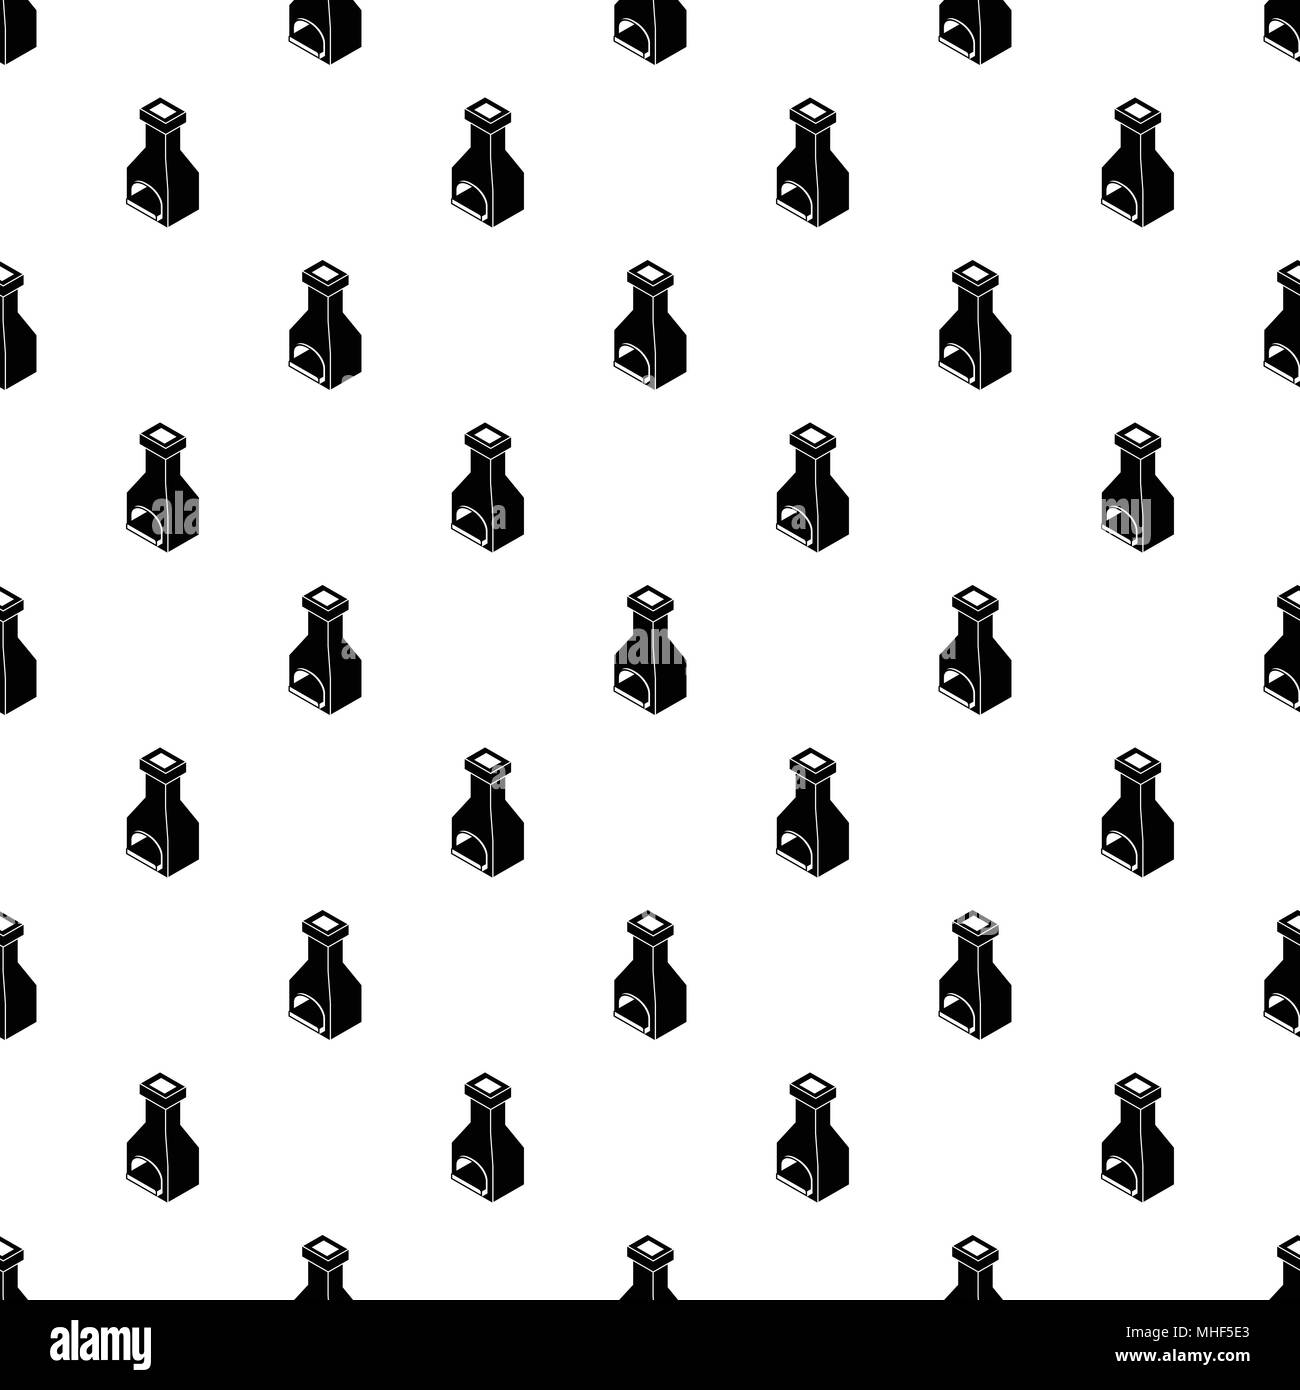 Old oven pattern vector seamless repeating for any web design Stock Vector